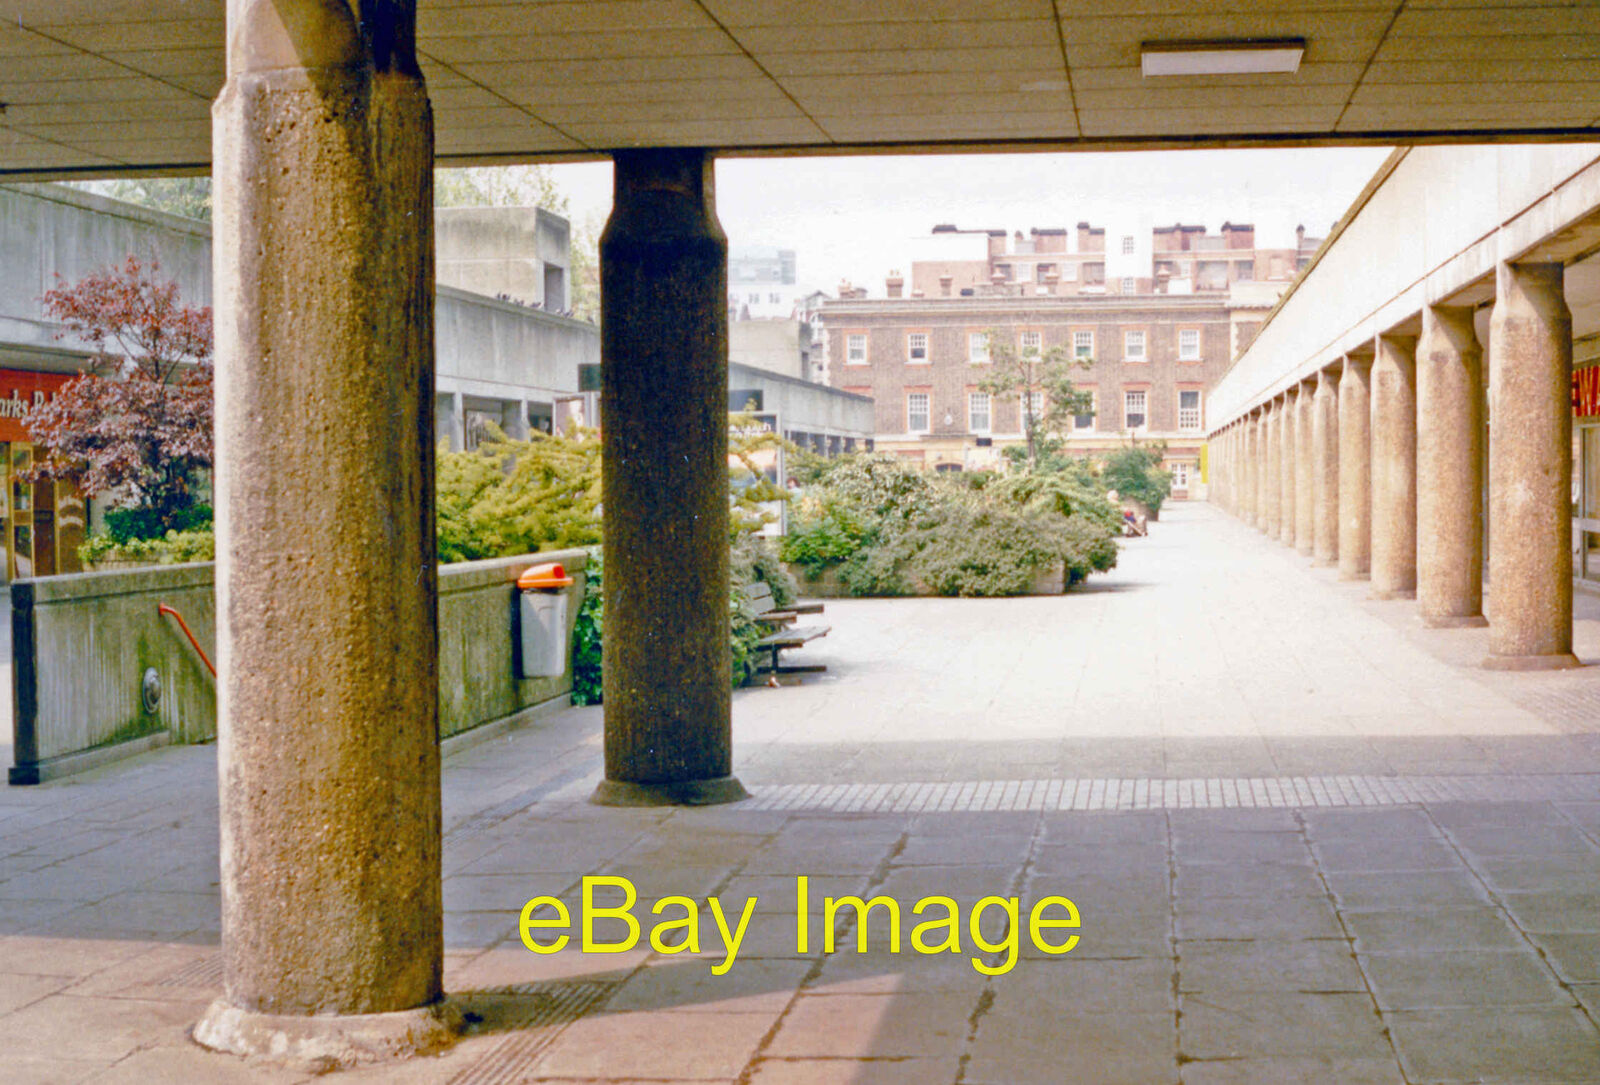 Photo 12x8 Holborn, 1988: Brunswick Centre London NW view in shopping arca c1988